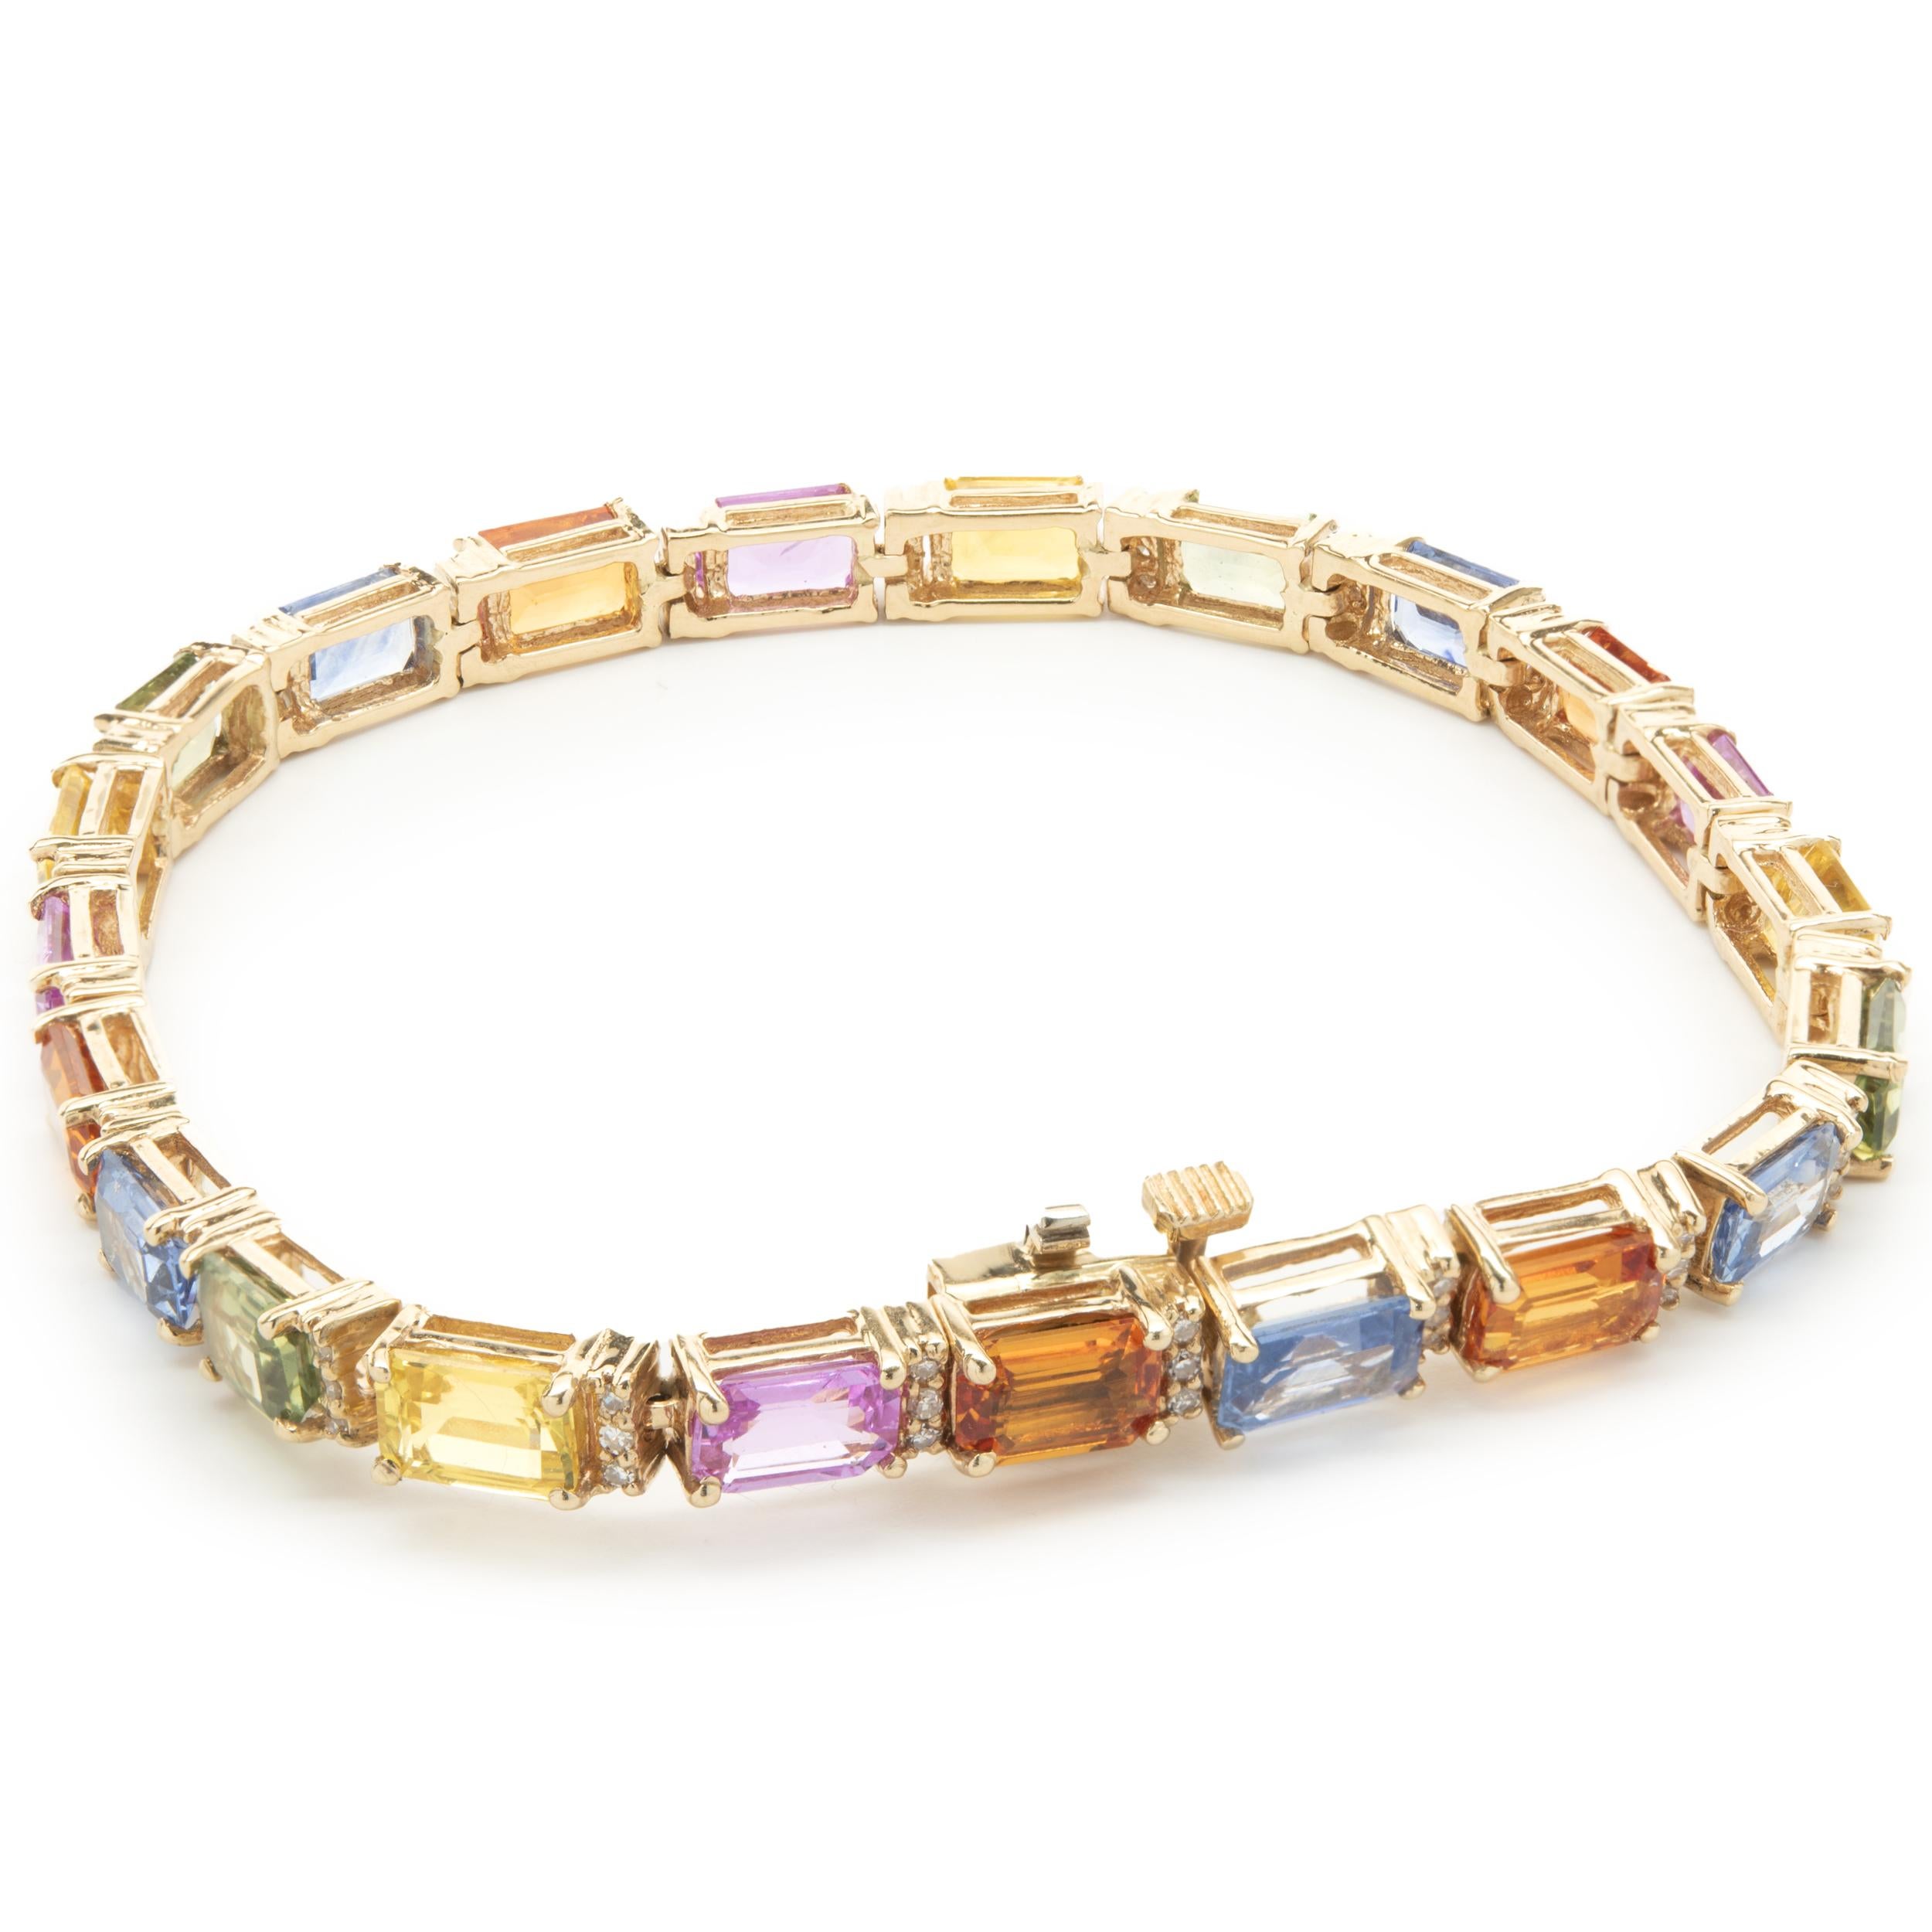 Designer: Effy
Material: 14K yellow gold
Diamond: 66 round brilliant cut = 0.50cttw
Color: G
Clarity: SI1
Dimensions: bracelet will fit up to a 6.5-inch wrist
Weight: 11.81 grams